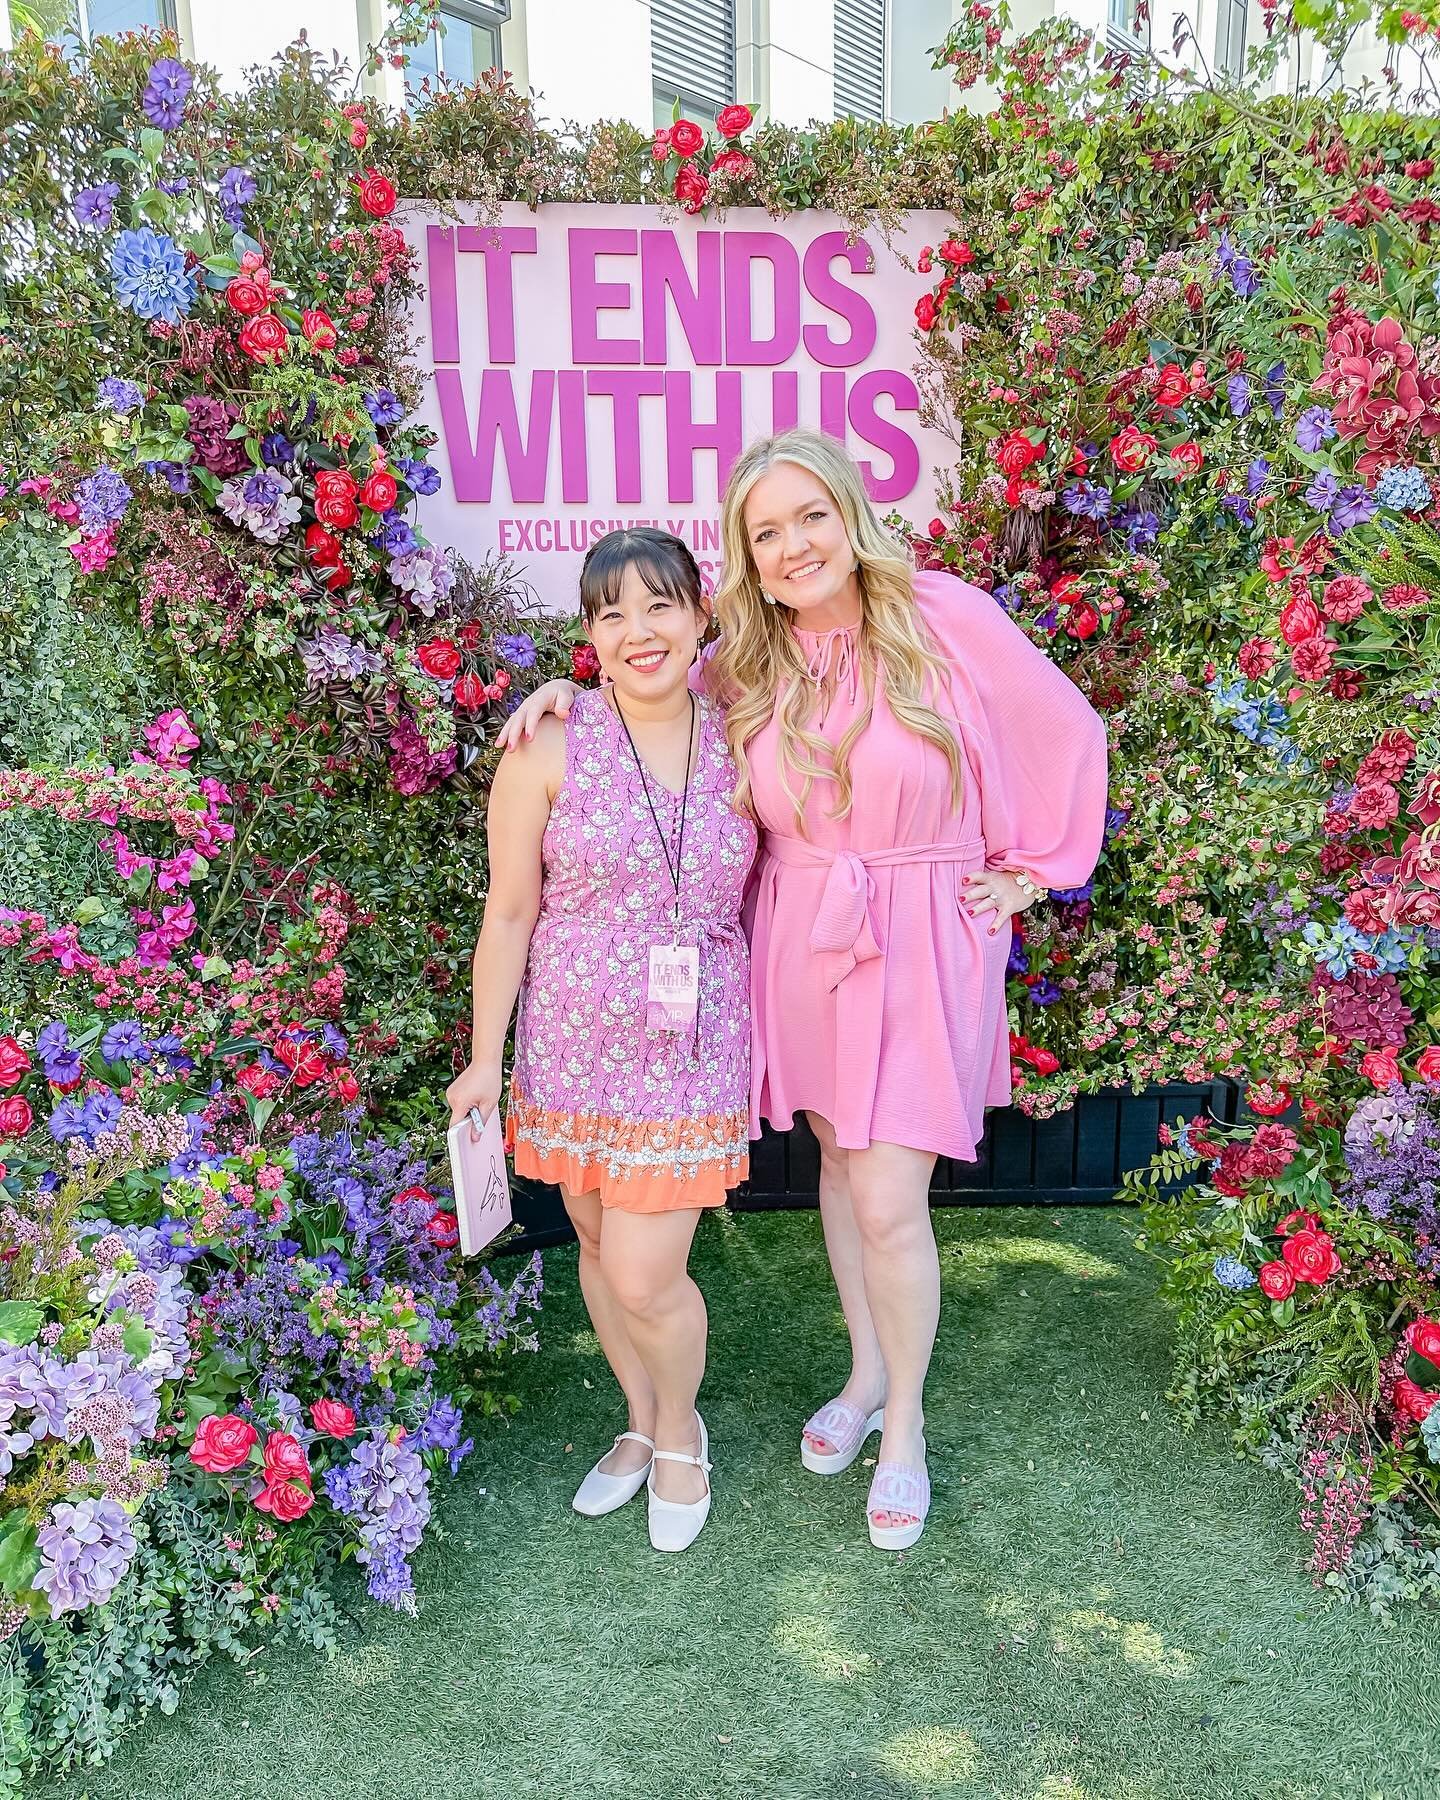 it ends with us 🌸

last week i was invited to be one of the very first people to see the @itendswithusmovie trailer and it was so good! (can we please talk about @taylorswift&rsquo;s &ldquo;my tears ricochet&rdquo; being perfectly used in the soundt